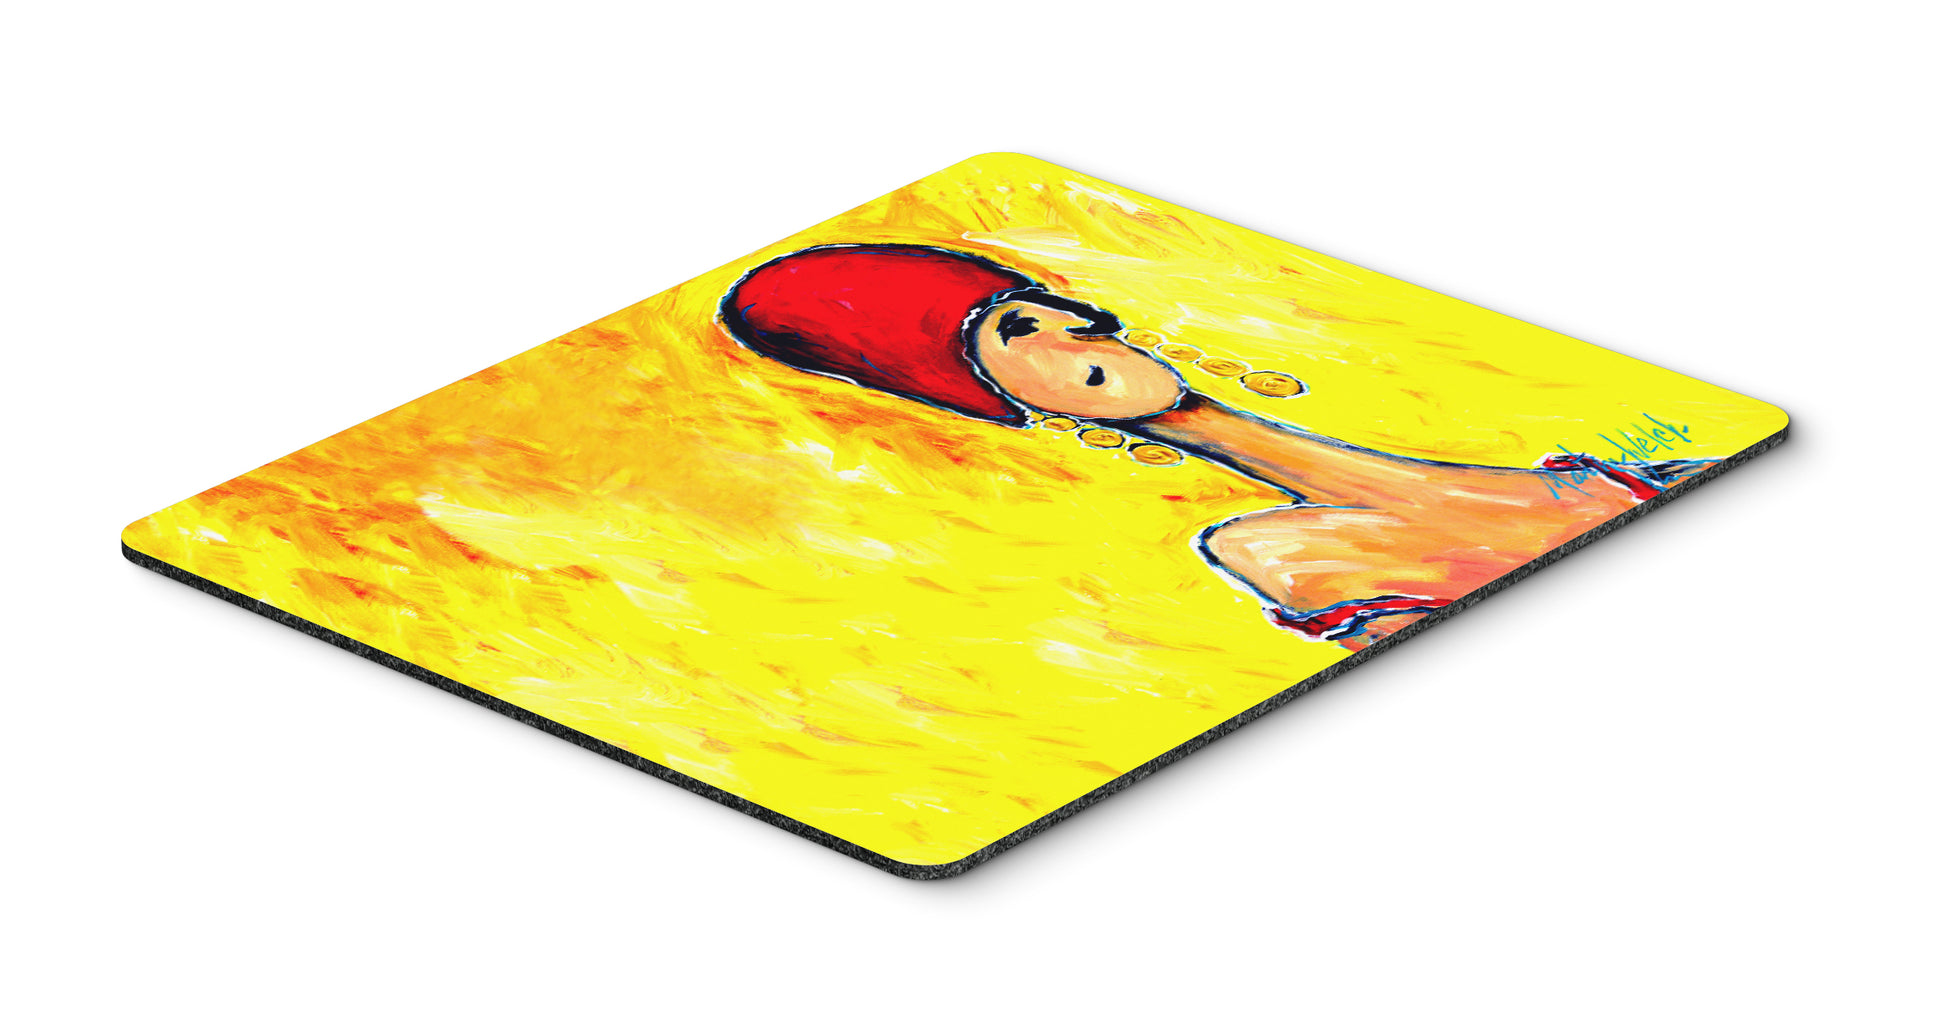 Buy this Azalines Earrings Lady Mouse Pad, Hot Pad or Trivet